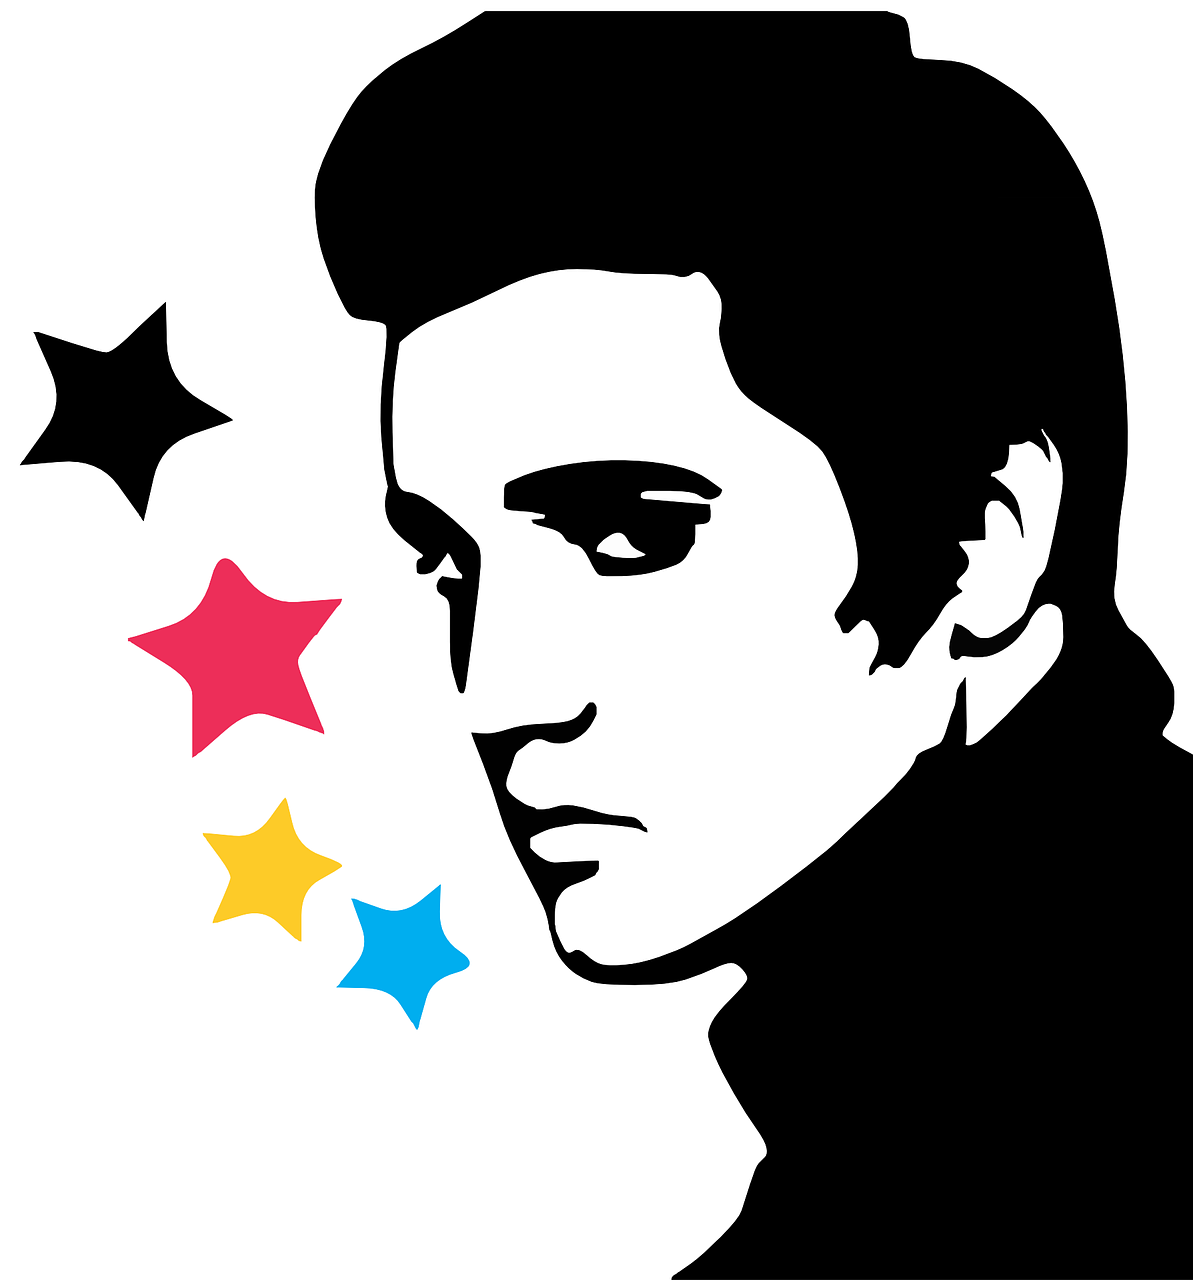 Elvis After Midnight: Contemplating Our Obsessions